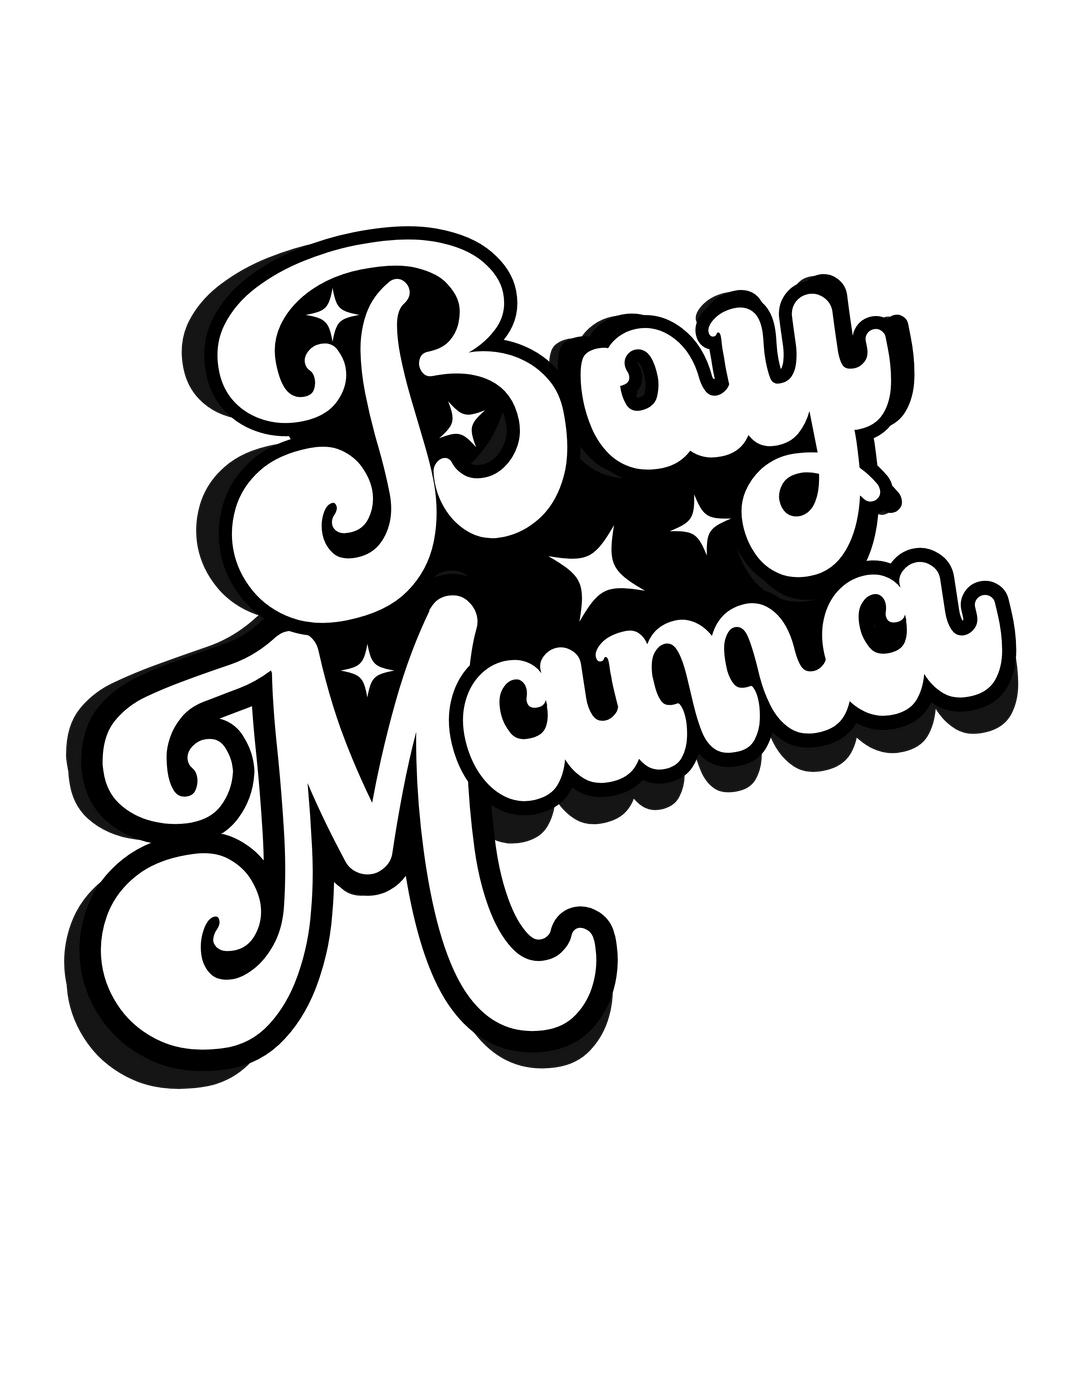 A black and white Boy Mama Tee with bold typography and a star symbol. 100% ring-spun cotton, garment-dyed for coziness, featuring a relaxed fit and durable double-needle stitching. From Worlds Worst Tees.